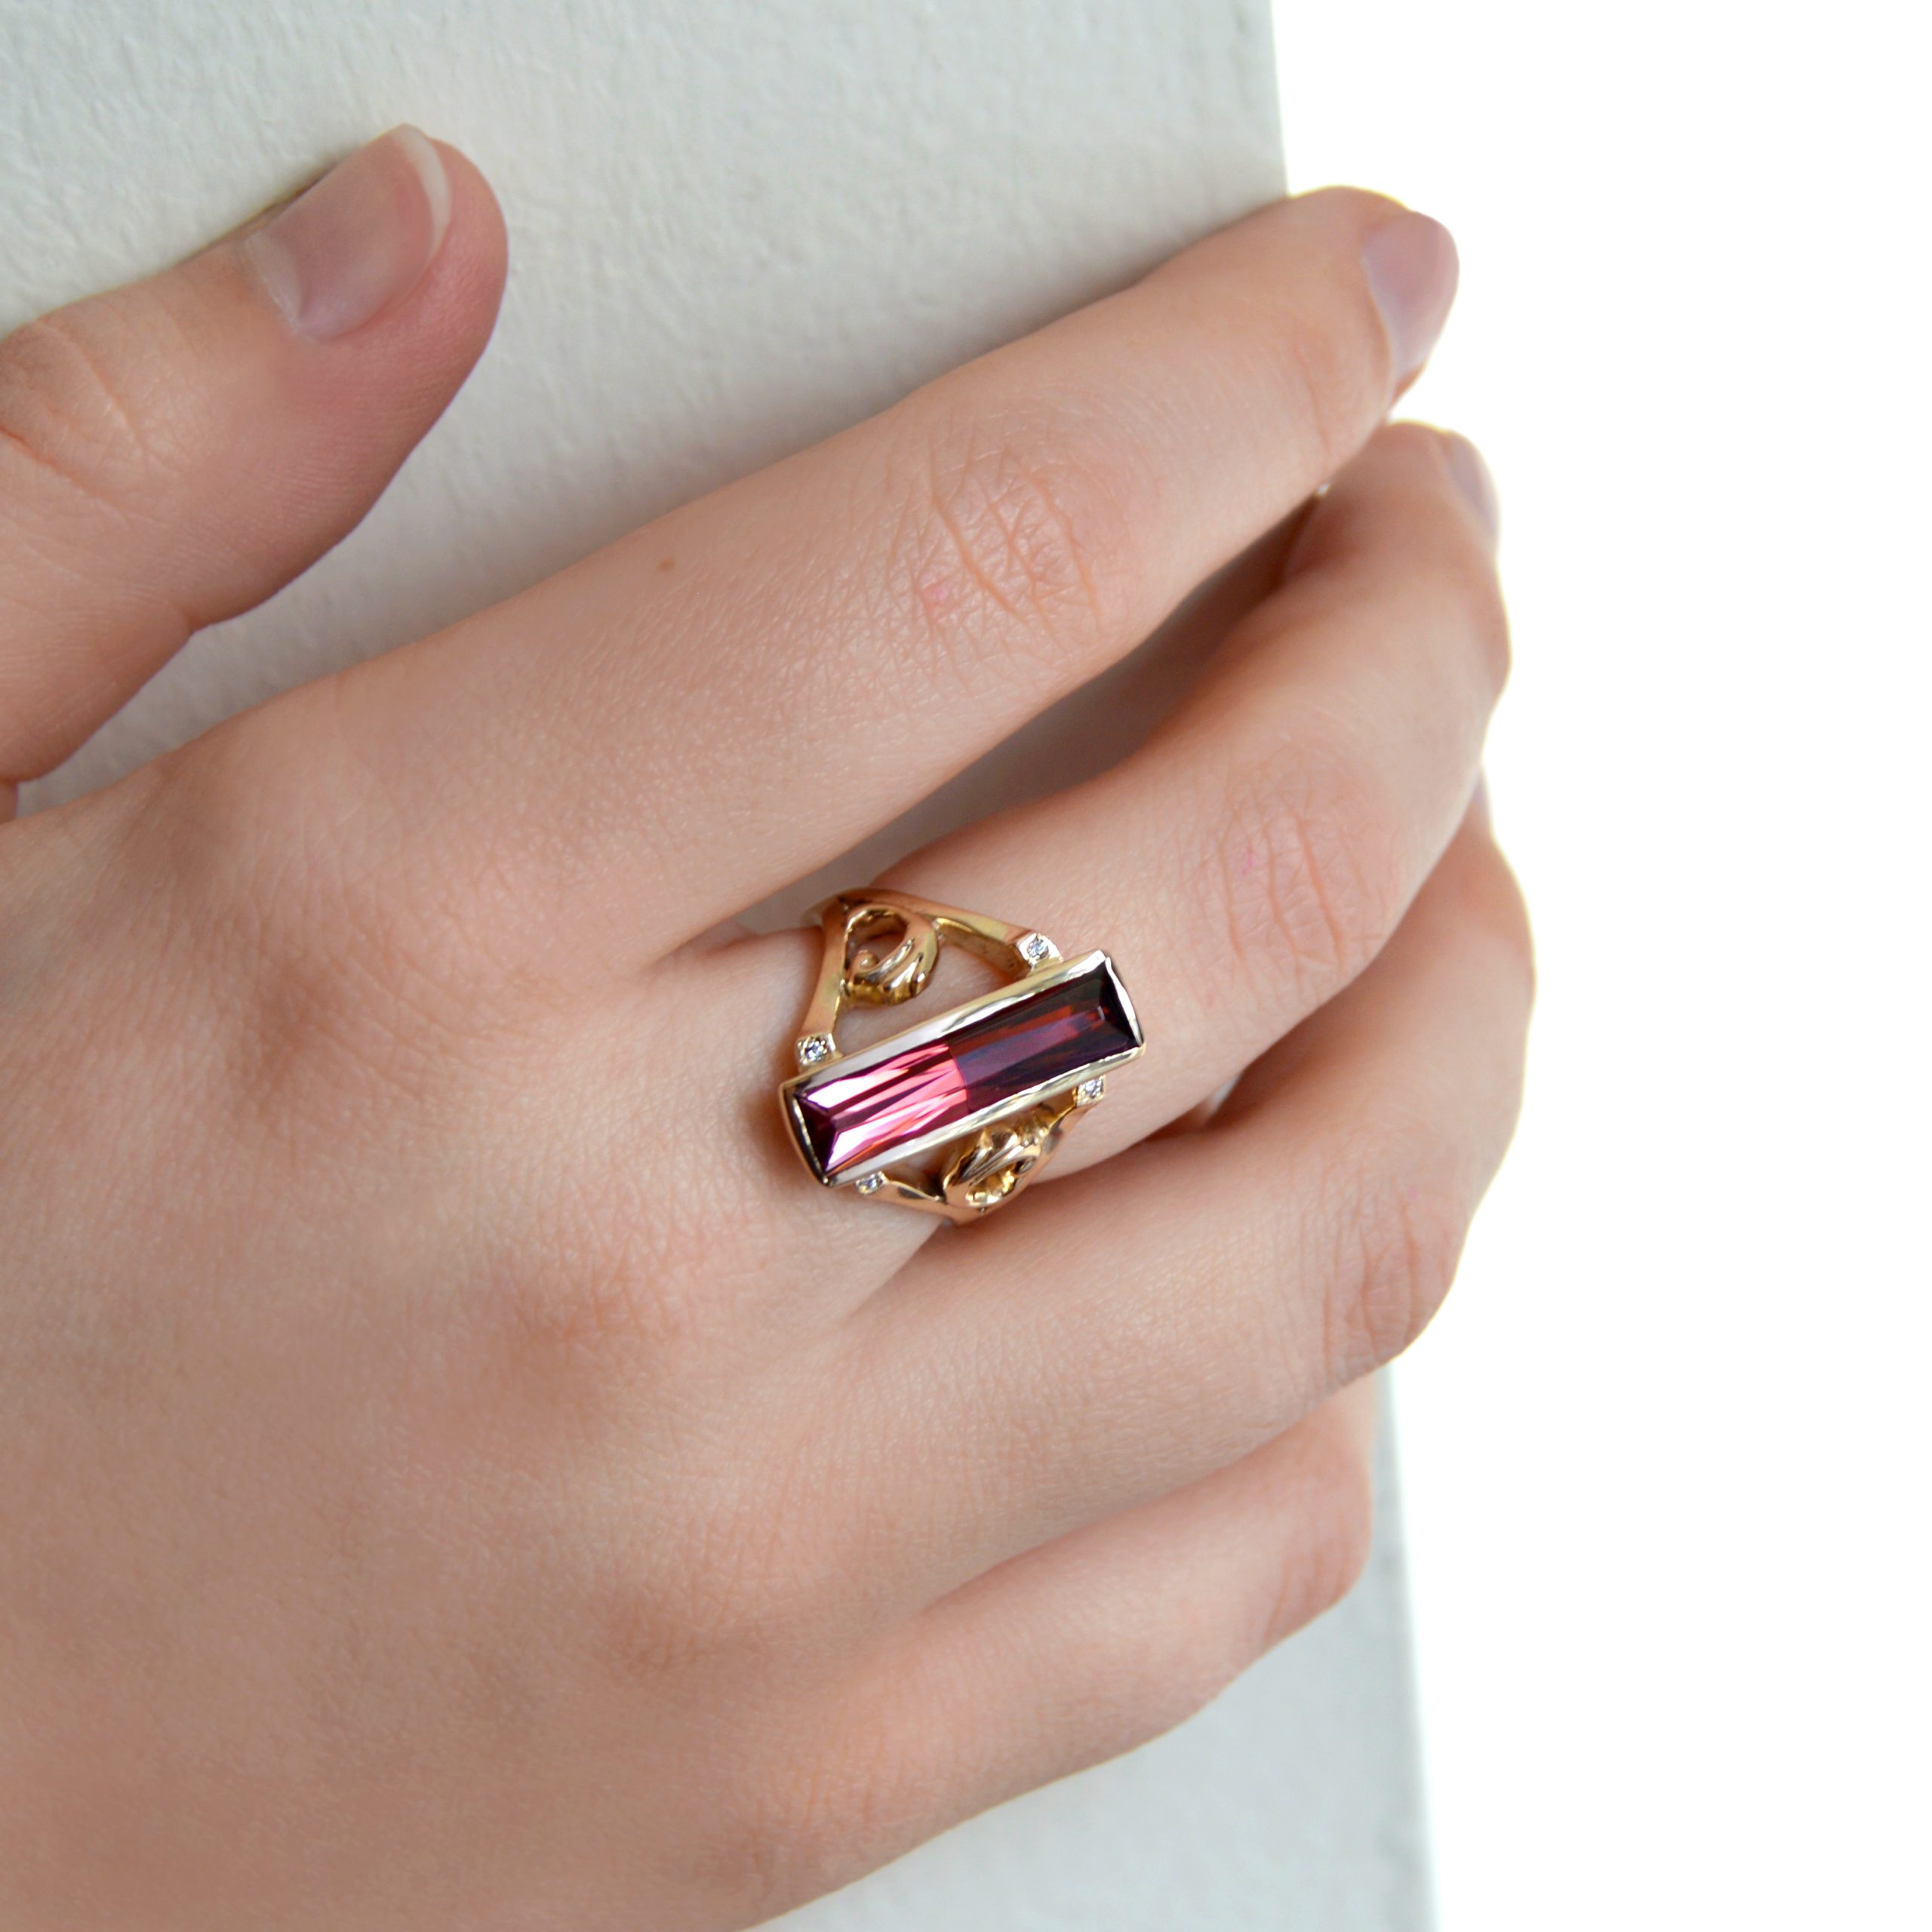 Pink tourmaline ring in yellow gold with scrolls and accent diamonds.